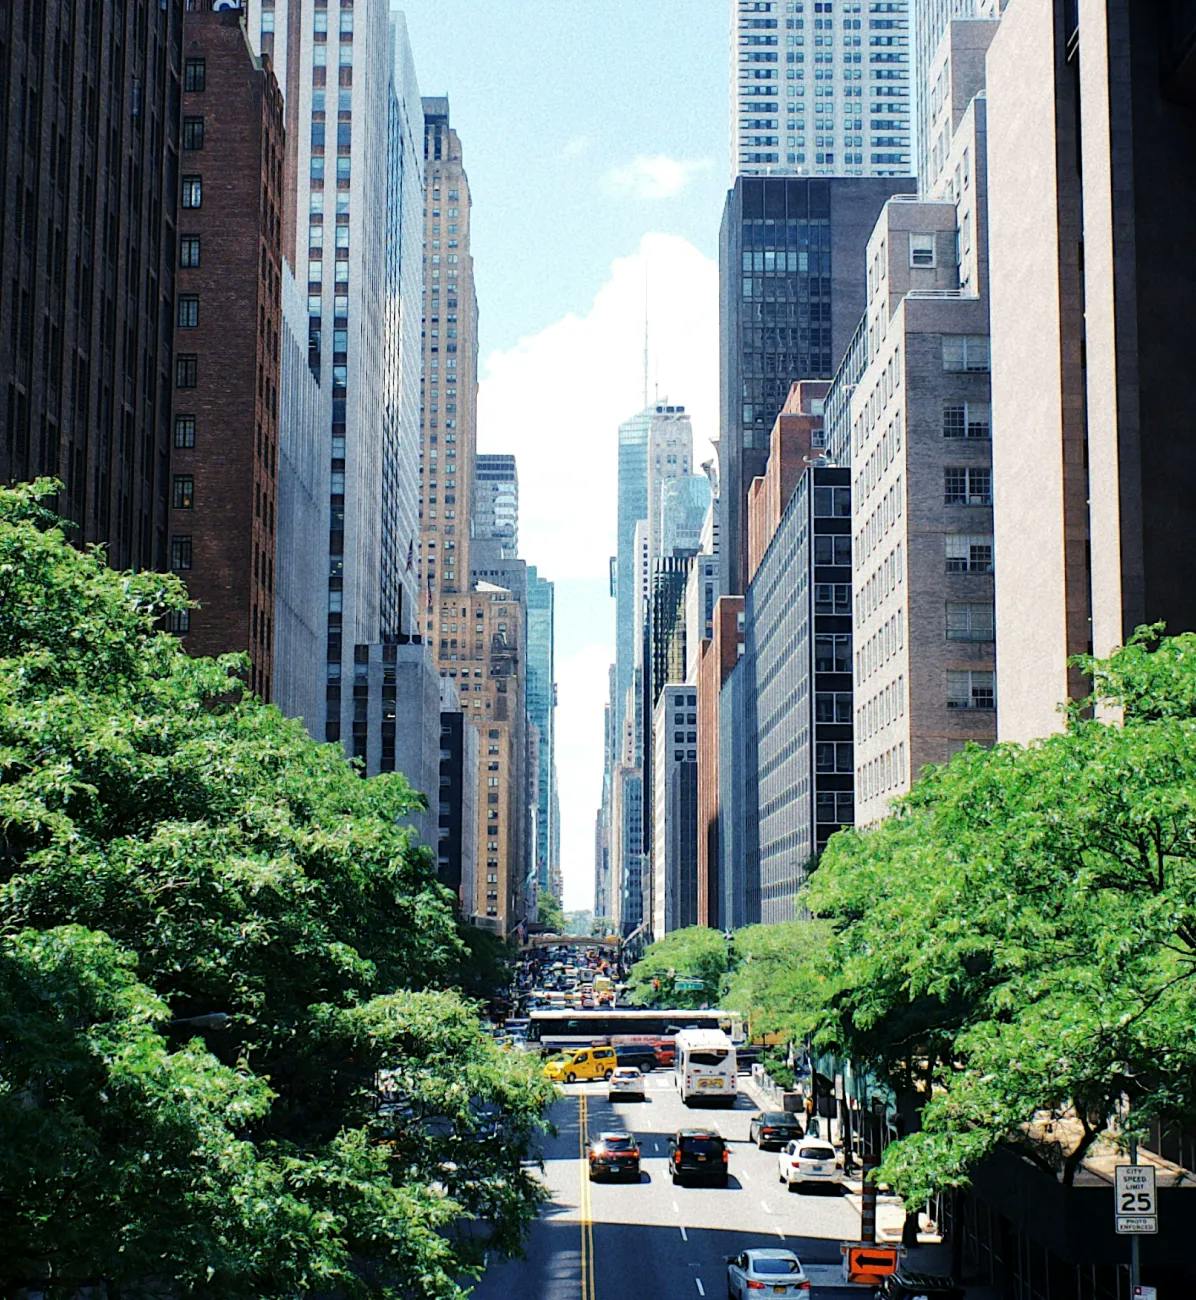 Image of an area in New York